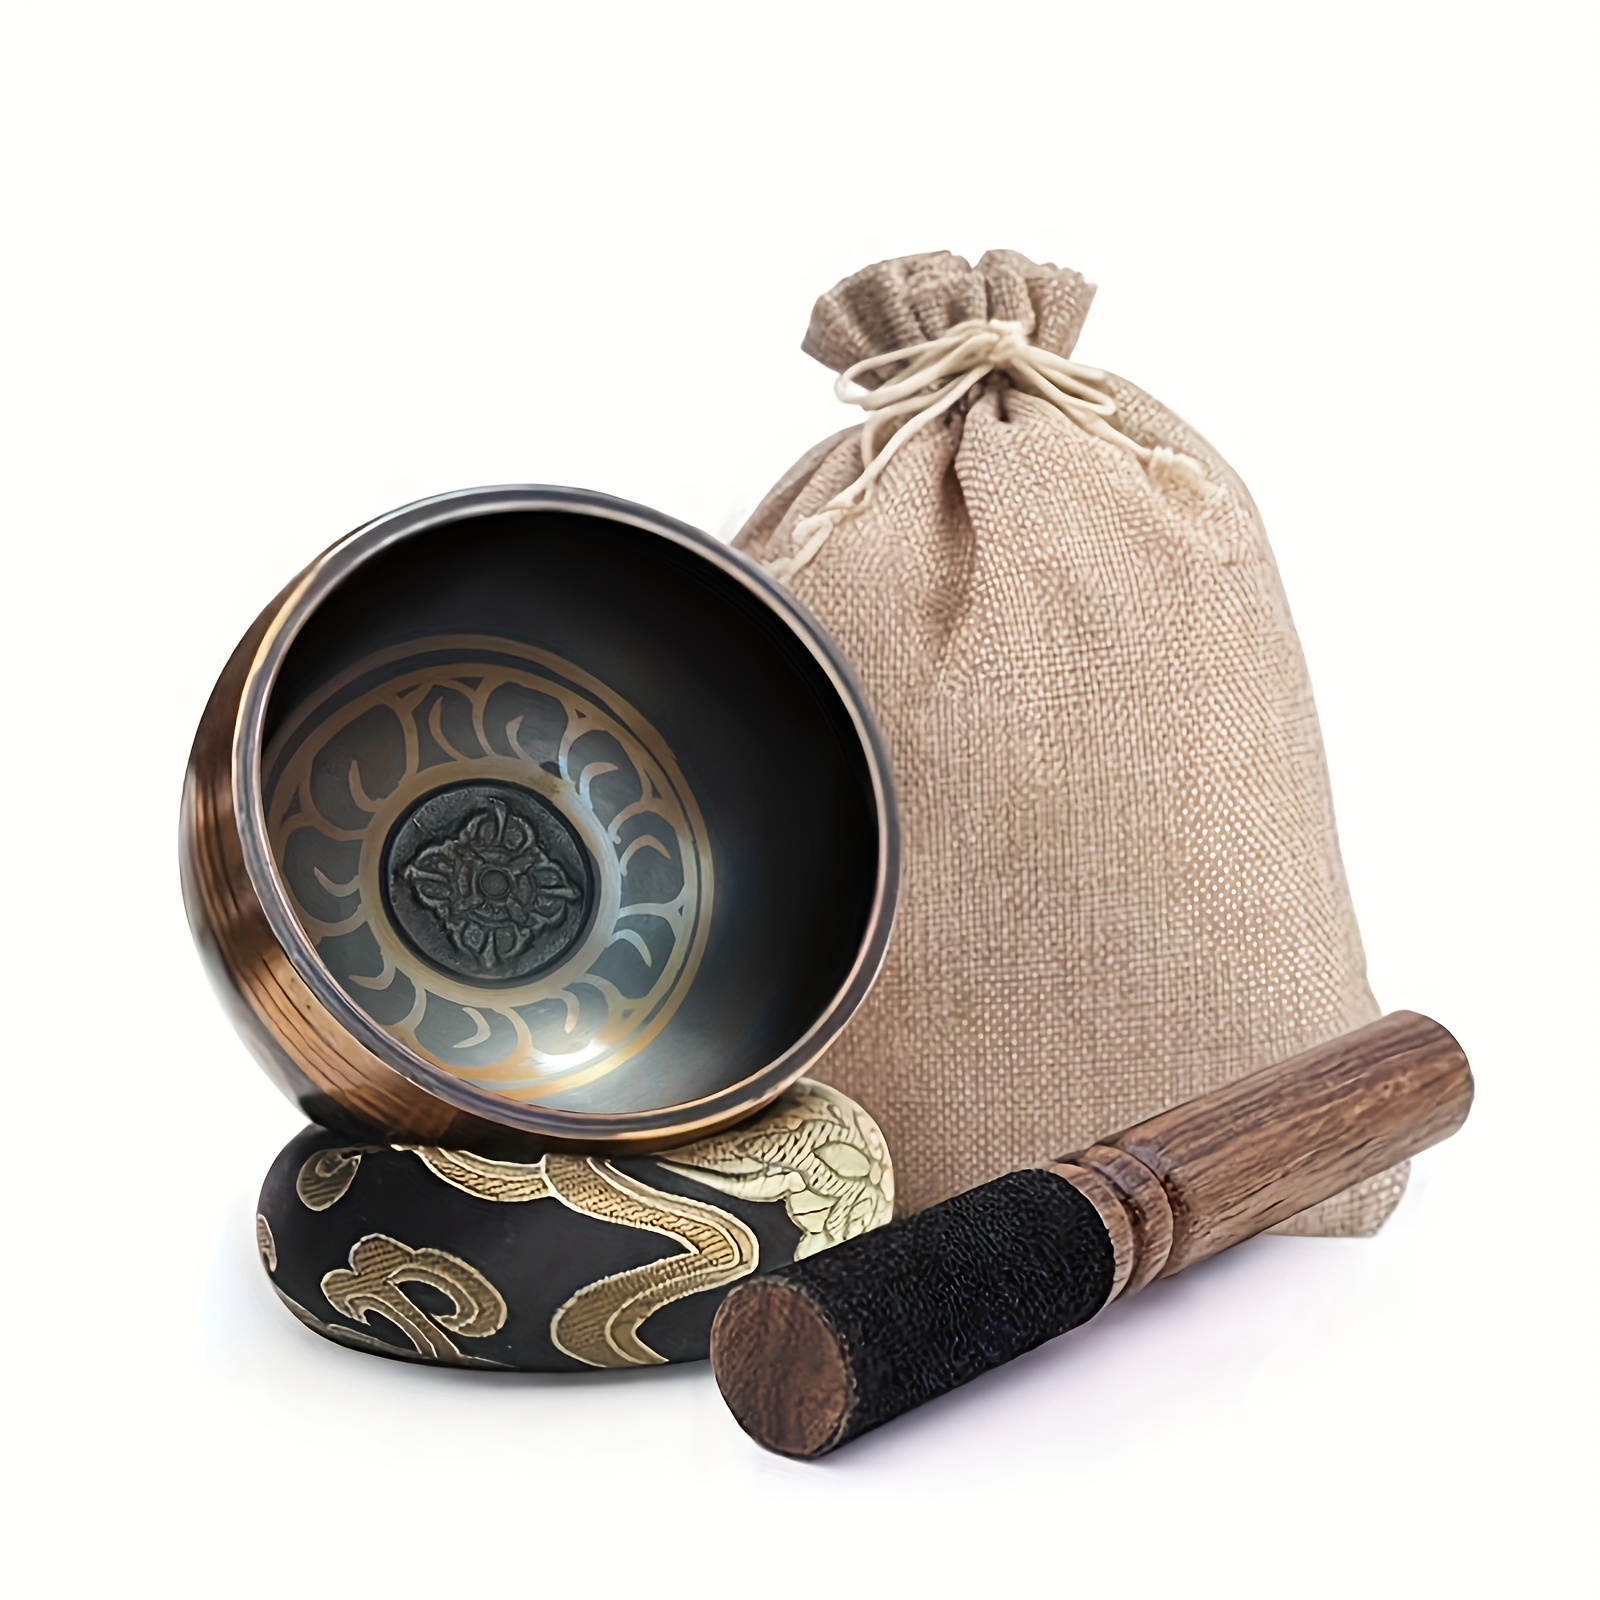 

Singing Bowl Set: 3.15 Inch Healing & Meditation Bowl - Handcrafted For Mindfulness & Relaxation